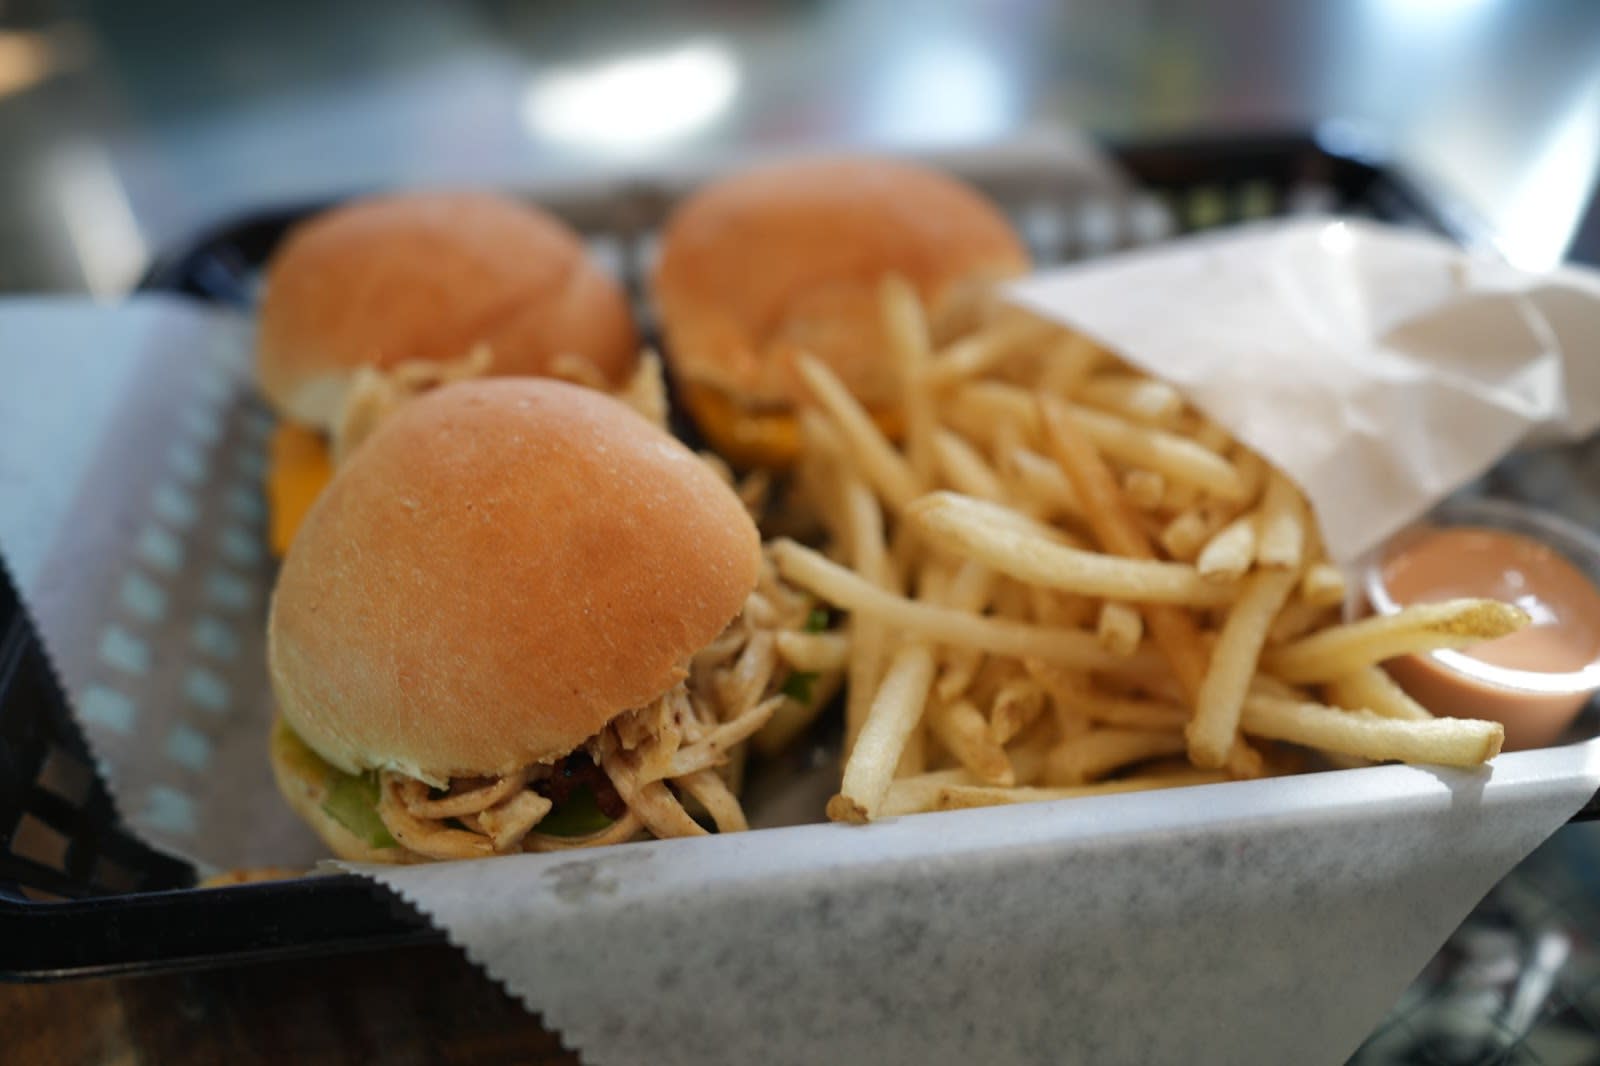 Sliders and fries